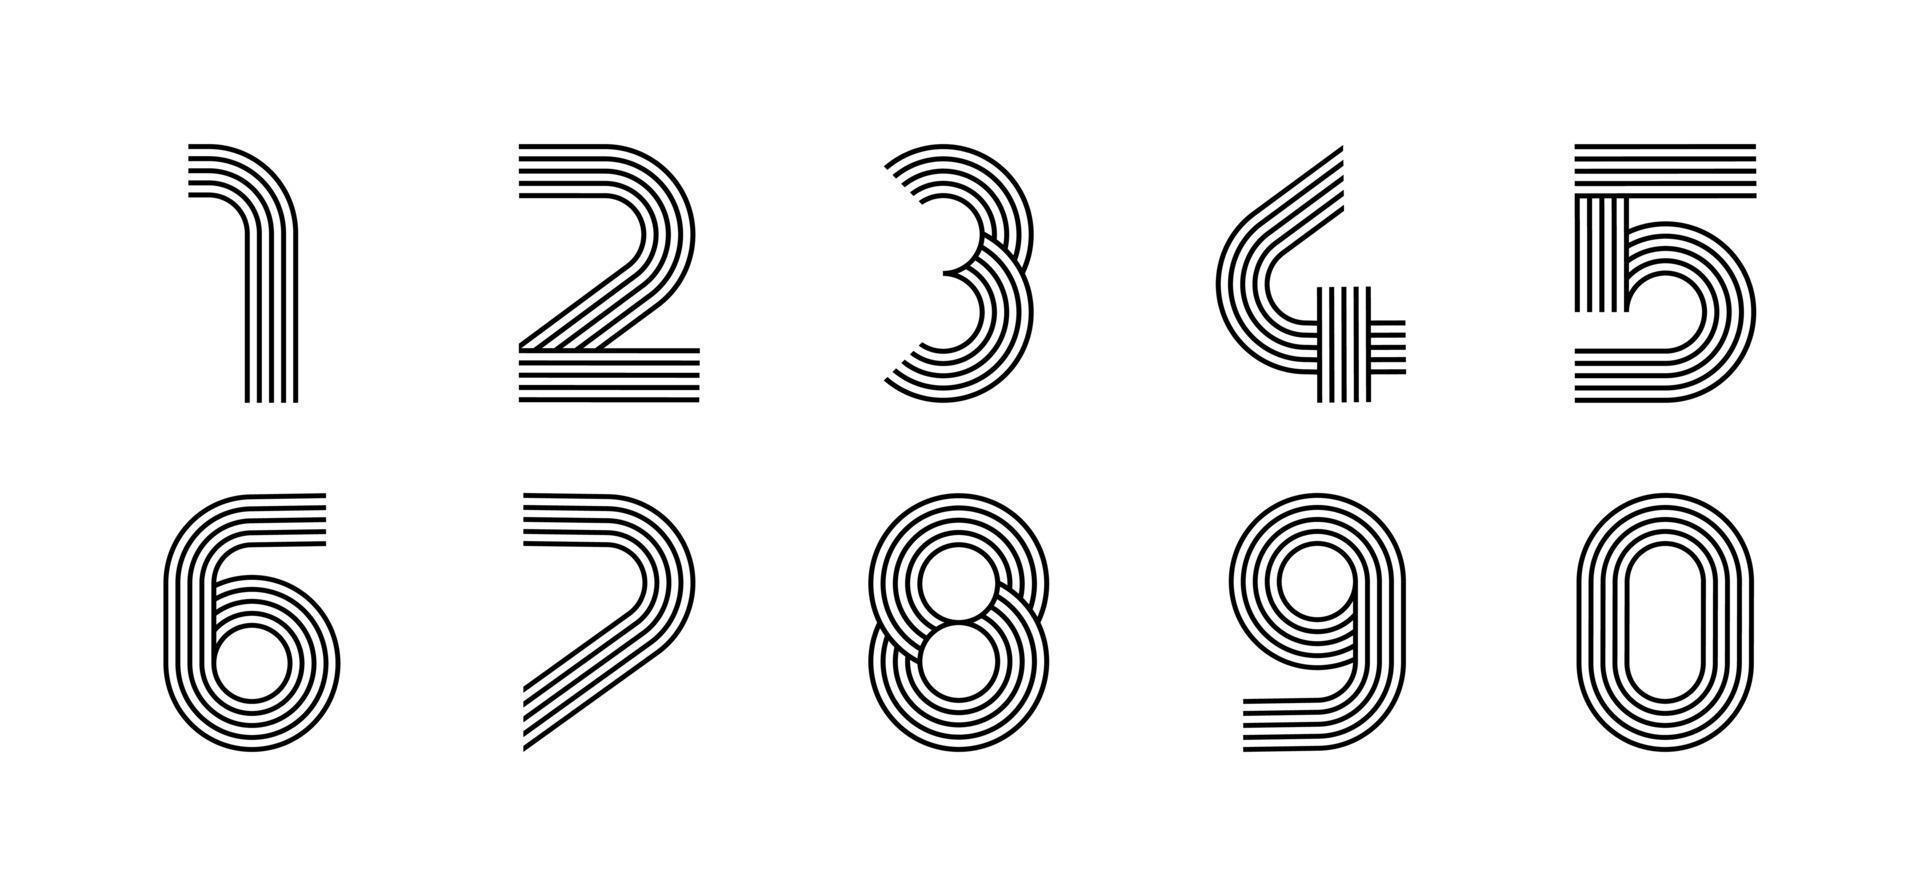 Digits linear modern logo. All numbers in line strip form. Alphabet number character and number linear abstract design. logo, corporate identity, app, creative poster and more. vector